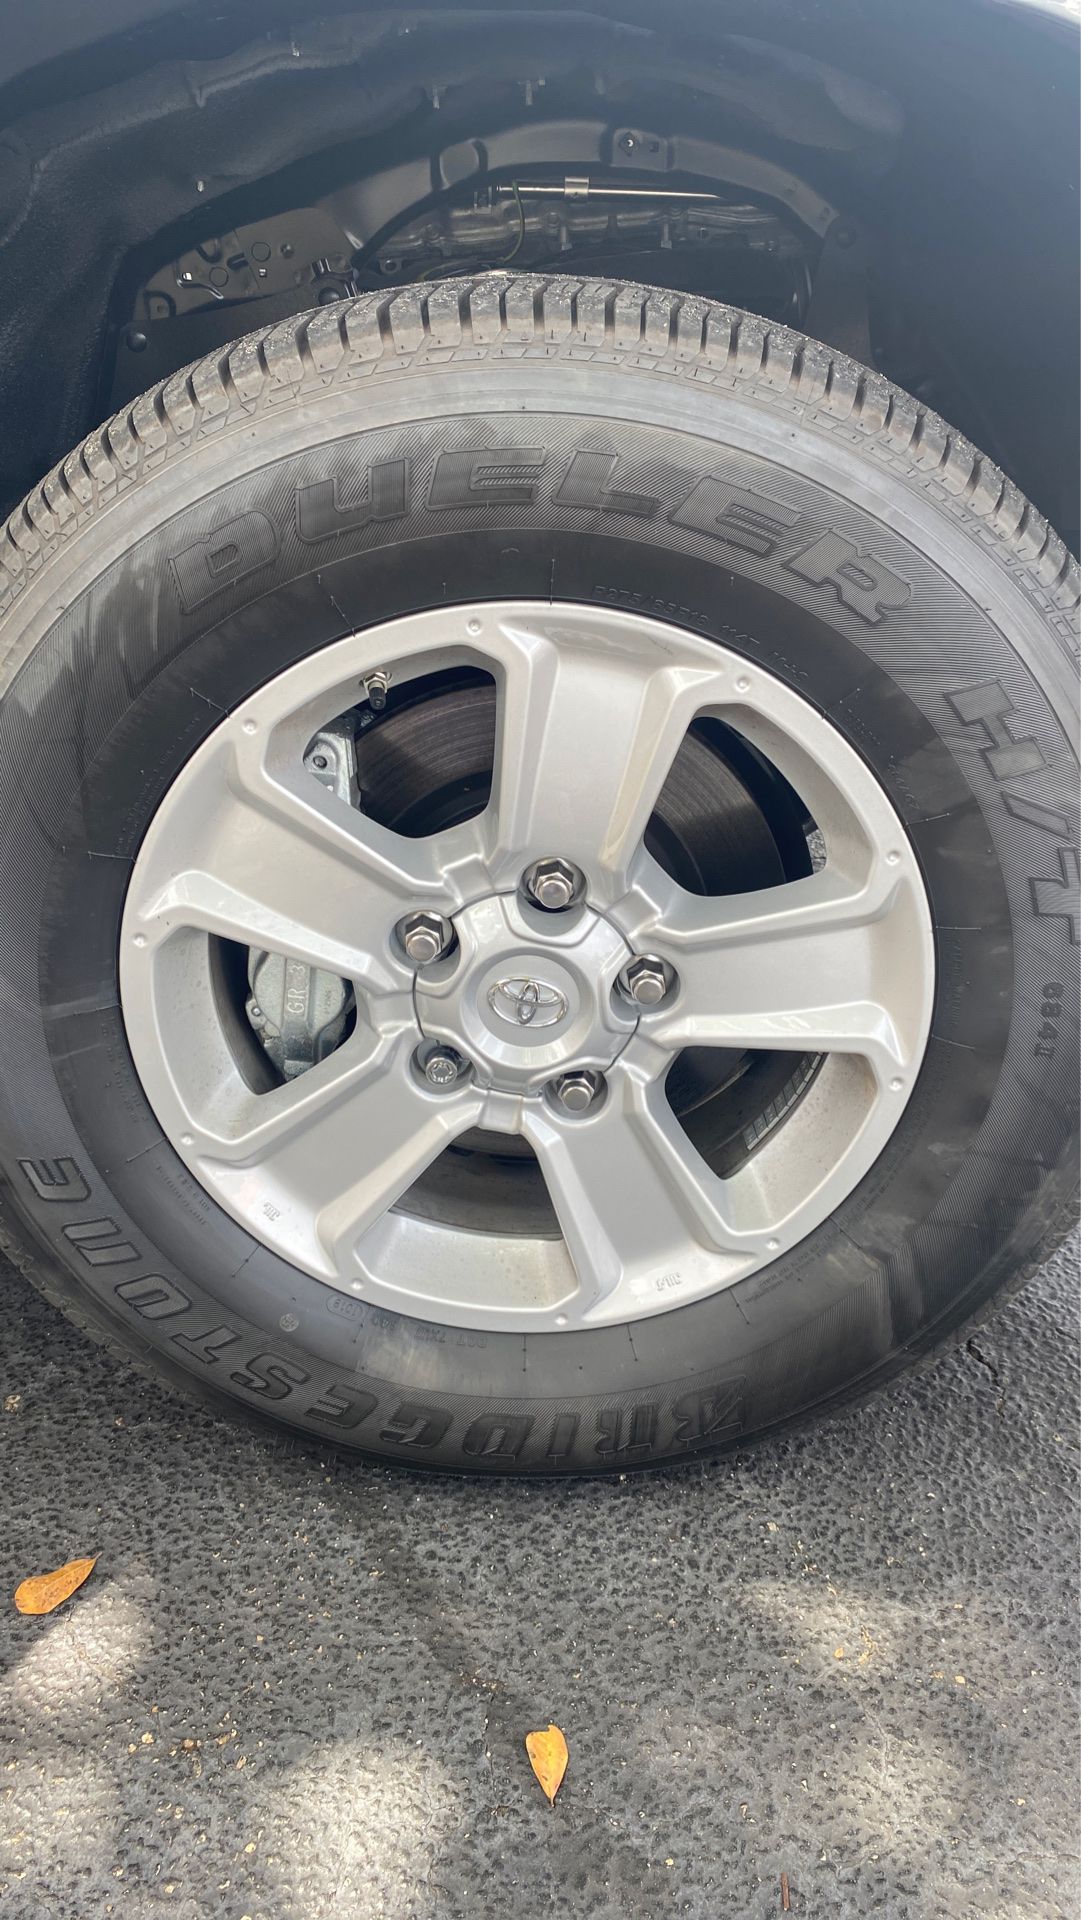 Toyota Tundra 2020 rims and tires